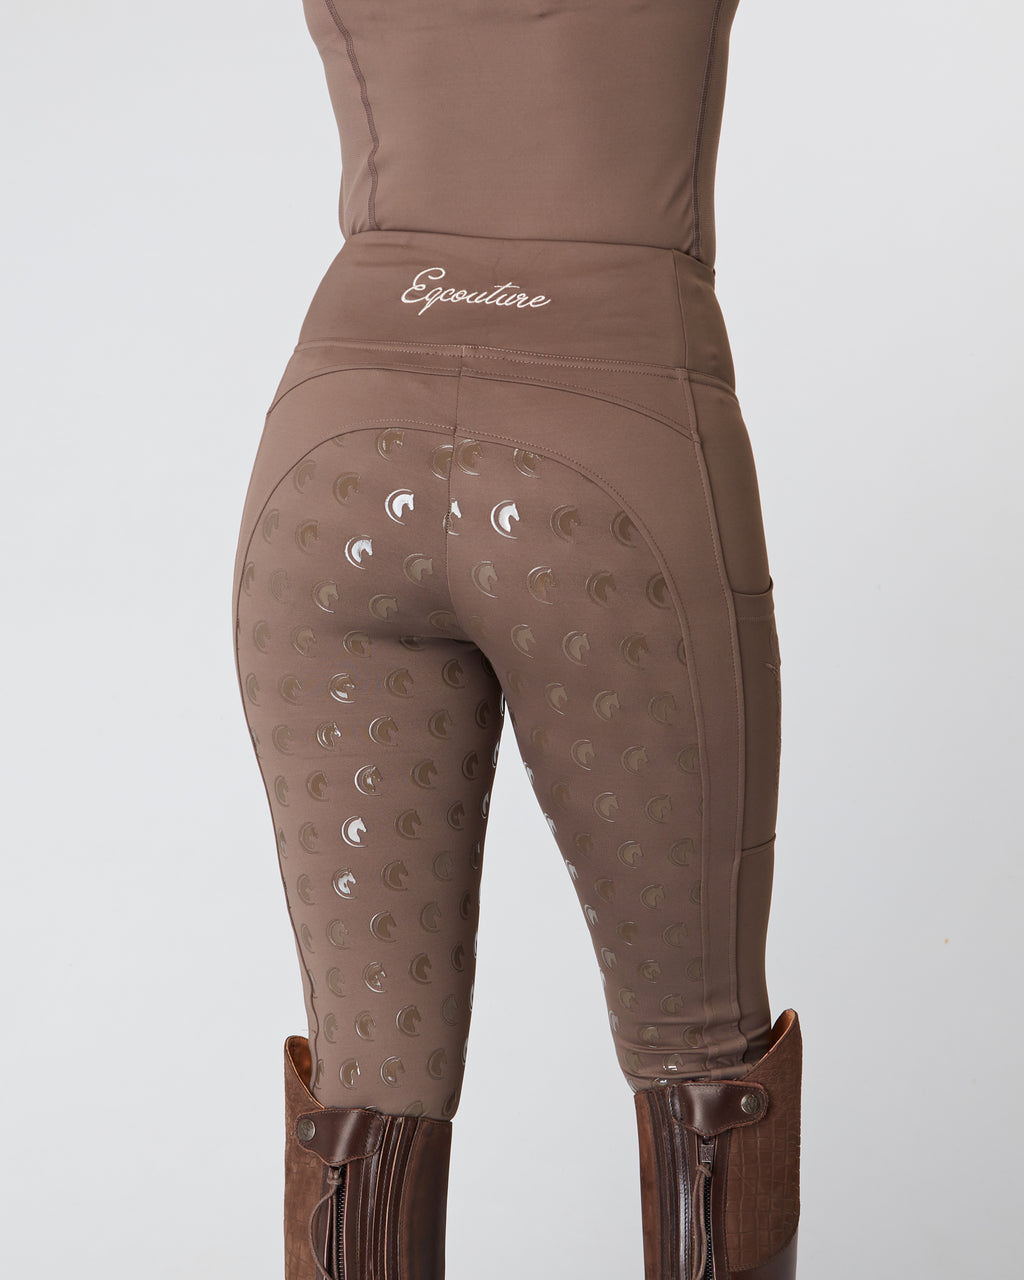 Horse Riding Leggings tights with phone pockets & full seat grip - brown  - Eqcouture